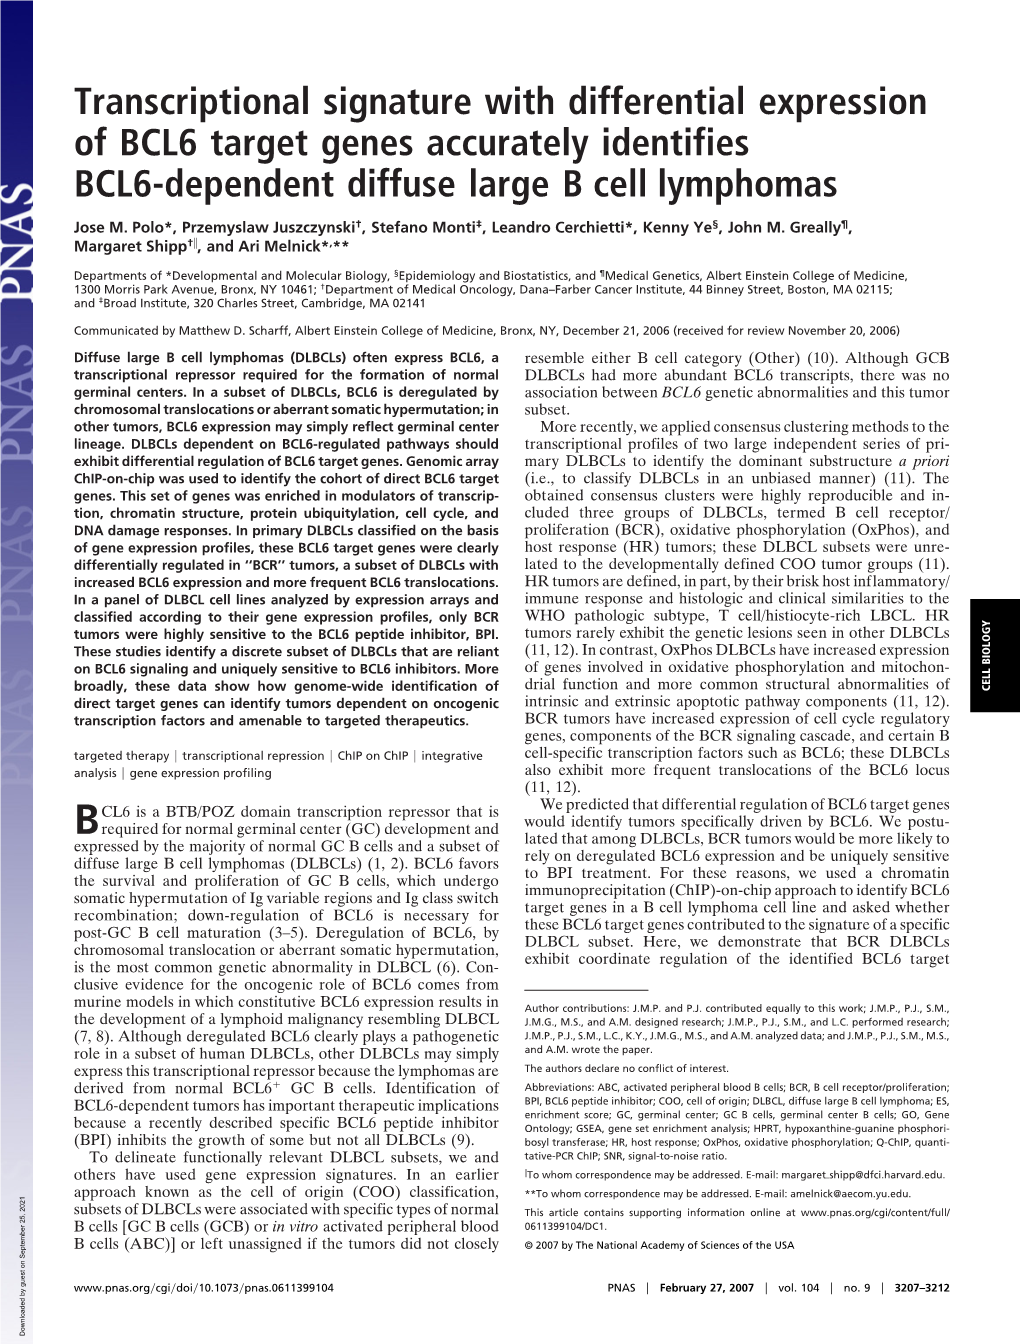 Transcriptional Signature with Differential Expression of BCL6 Target Genes Accurately Identifies BCL6-Dependent Diffuse Large B Cell Lymphomas